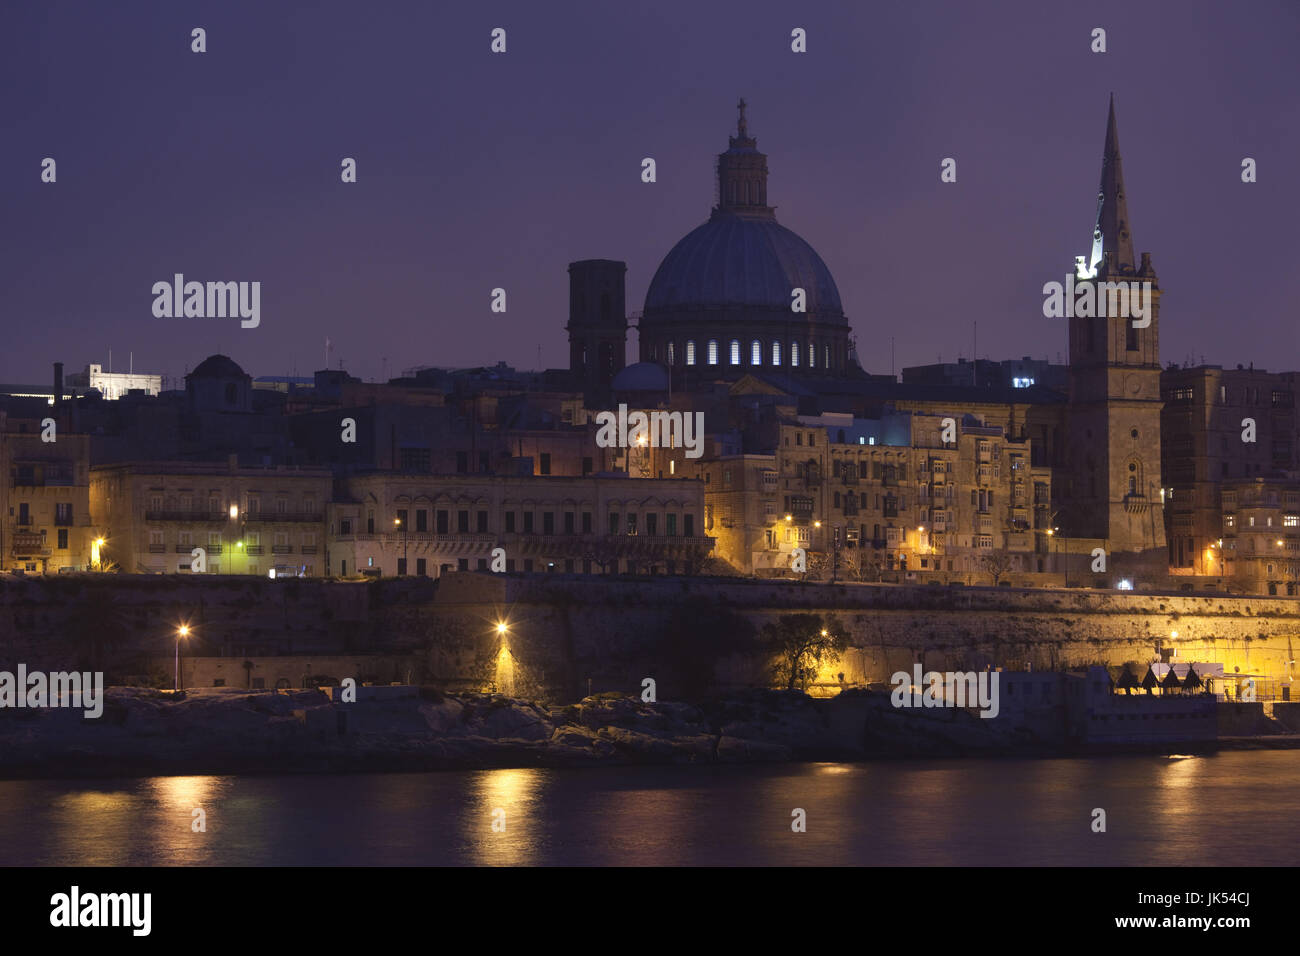 Malta, Valletta, city view with St. Paul's Anglican Cathedral and Carmelite Church from Sliema, dusk Stock Photo